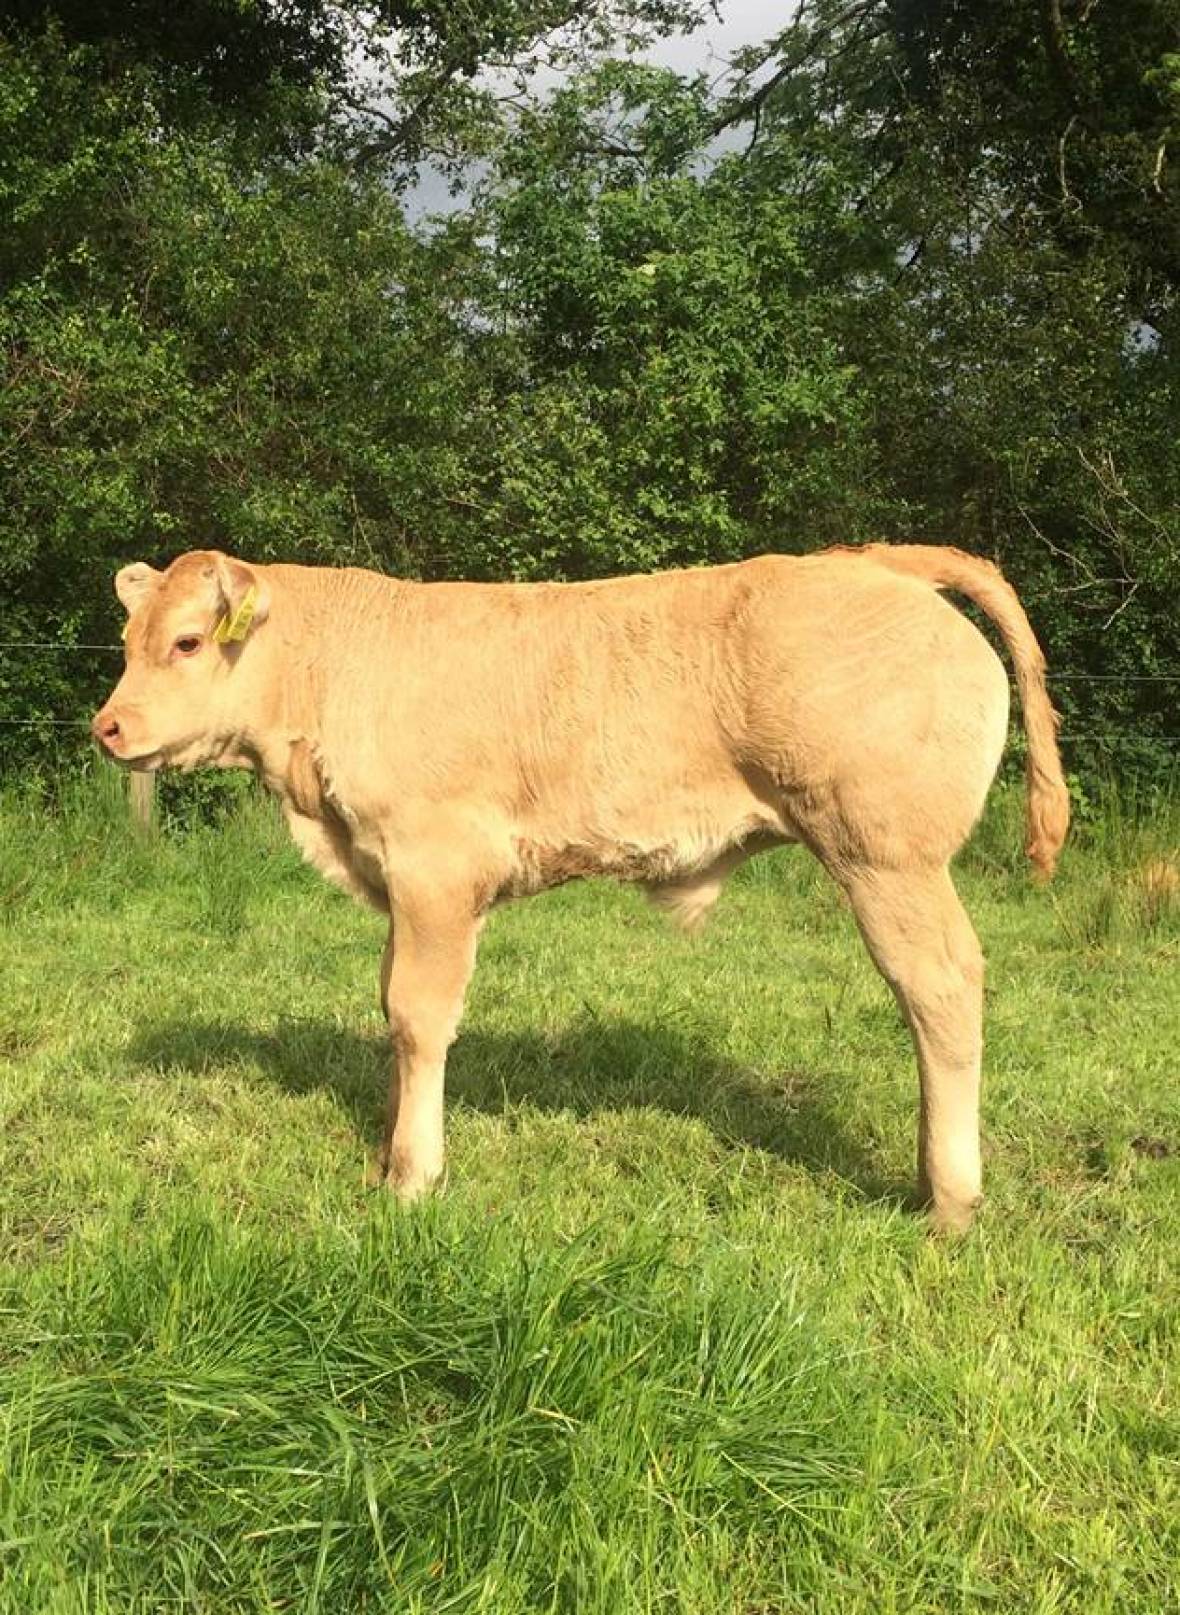 Ifor calf born unassisted to a Limousin cross cow, bred by Liam Whitaker.